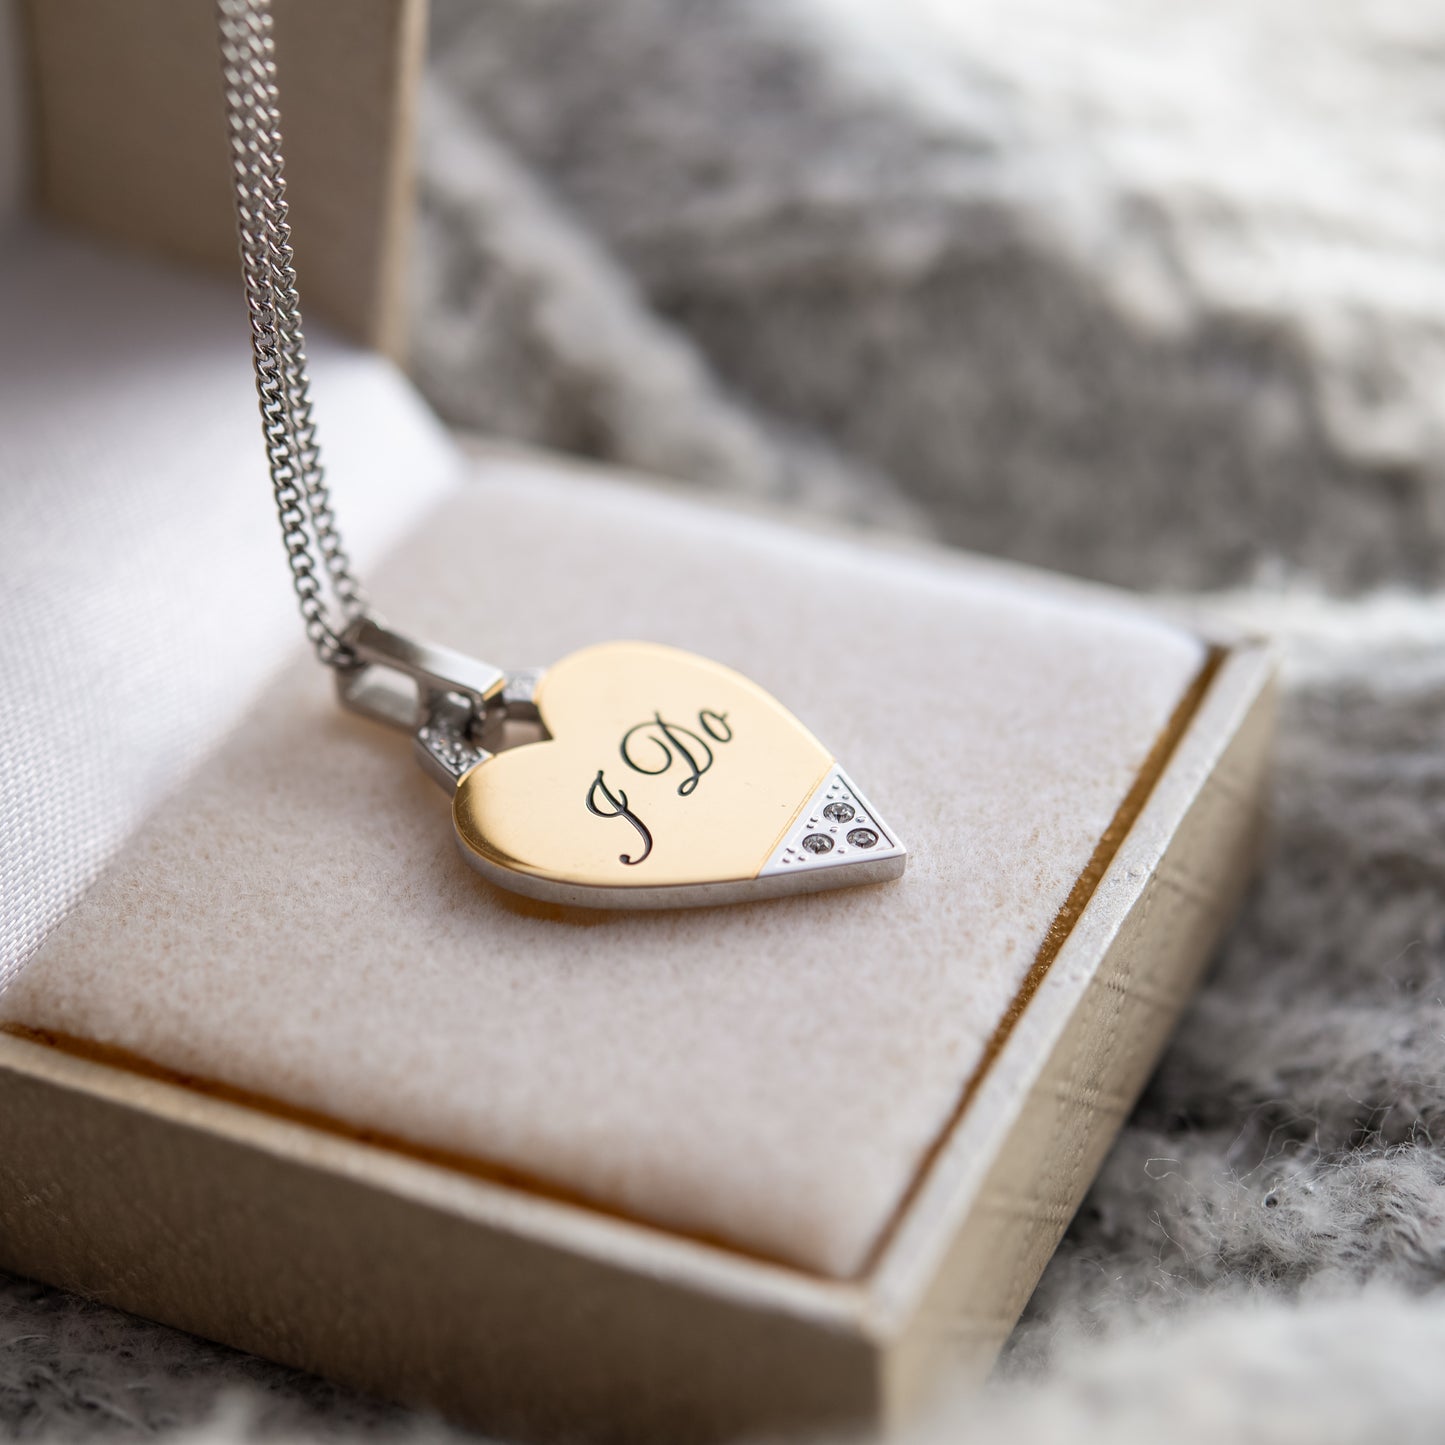 I Do Engraved Gold Plated Stainless Steel Heart Pendant Necklace with Cubic Zirconia